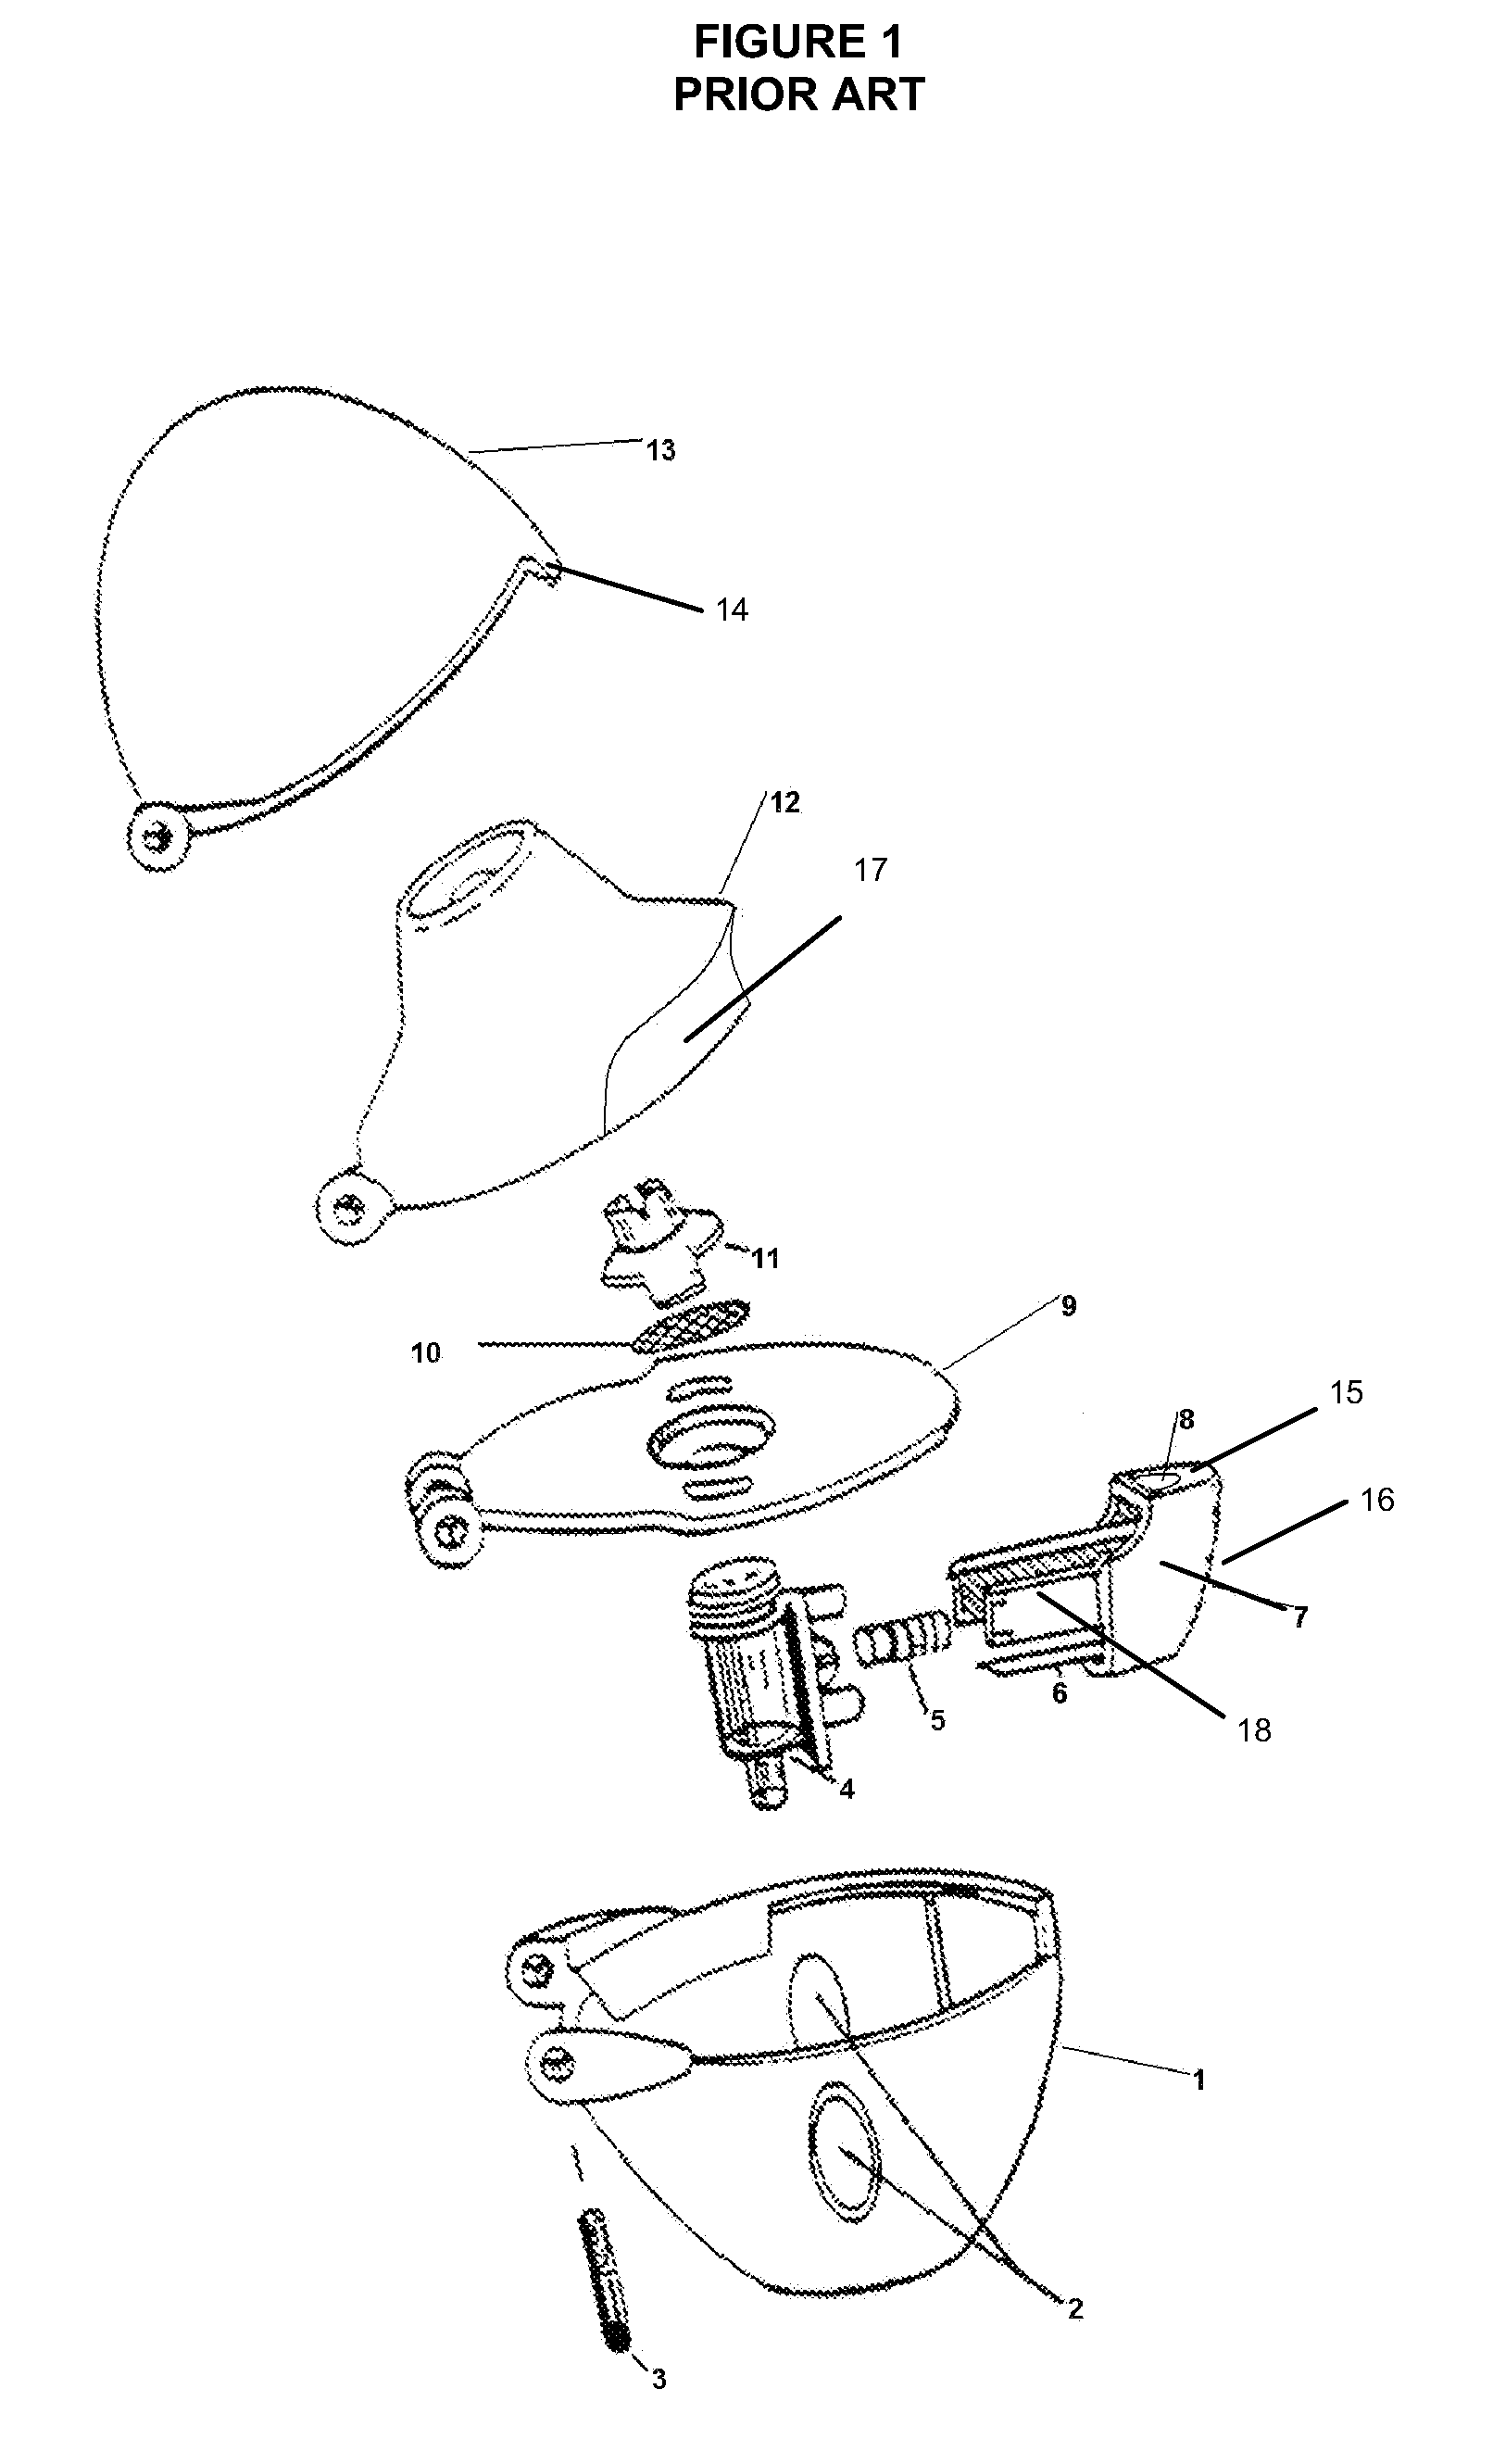 Needle for piercing a powder capsule for inhalation